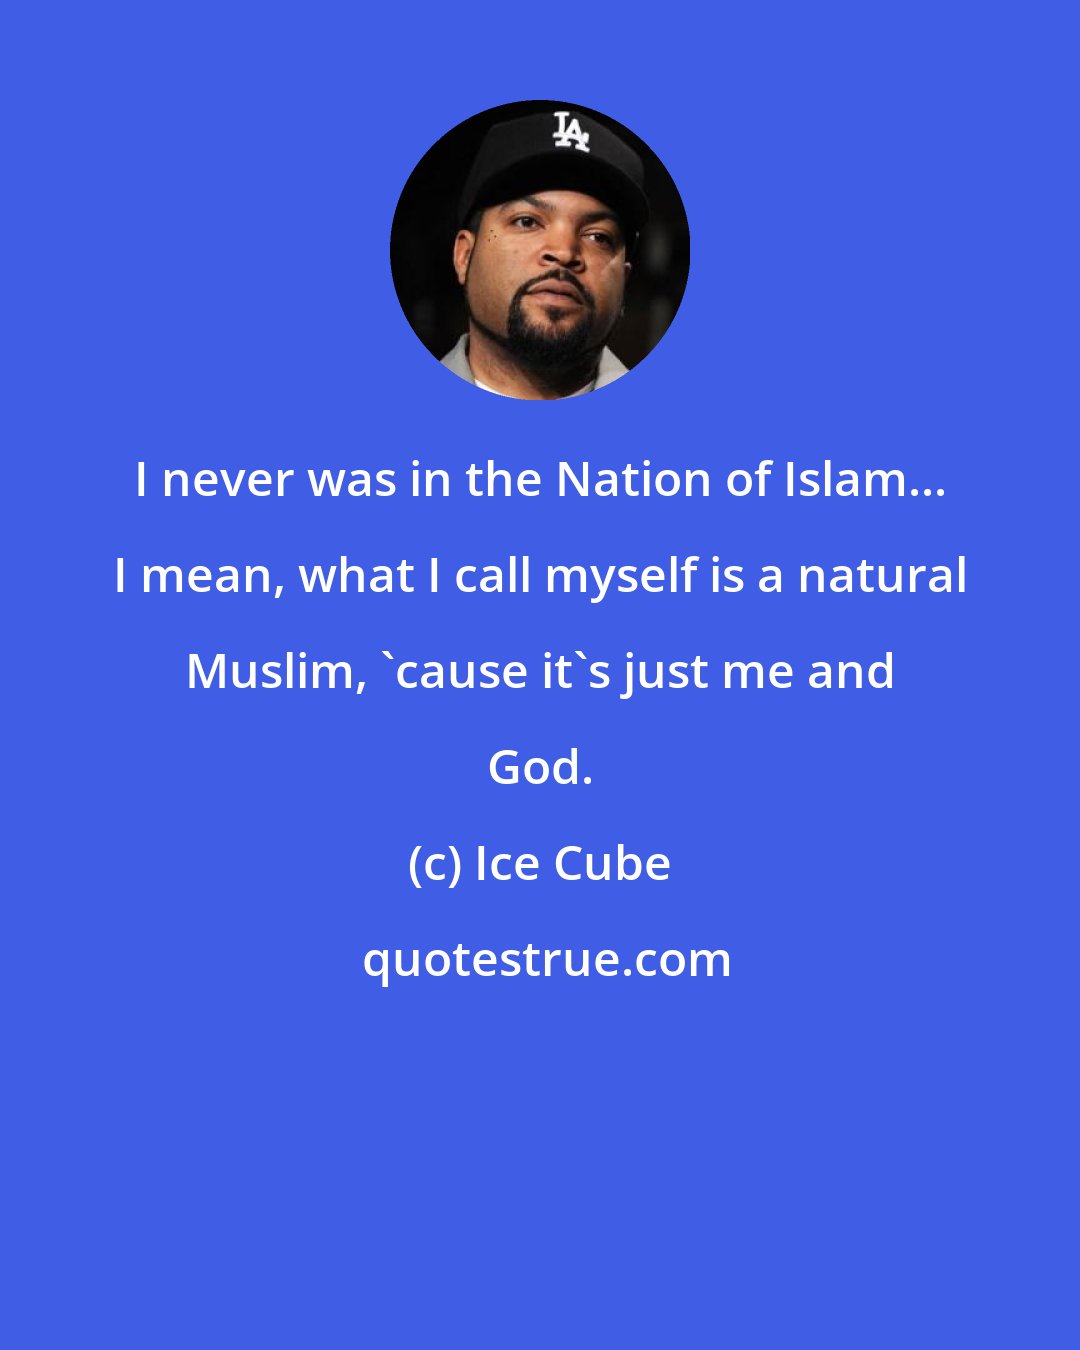 Ice Cube: I never was in the Nation of Islam... I mean, what I call myself is a natural Muslim, 'cause it's just me and God.